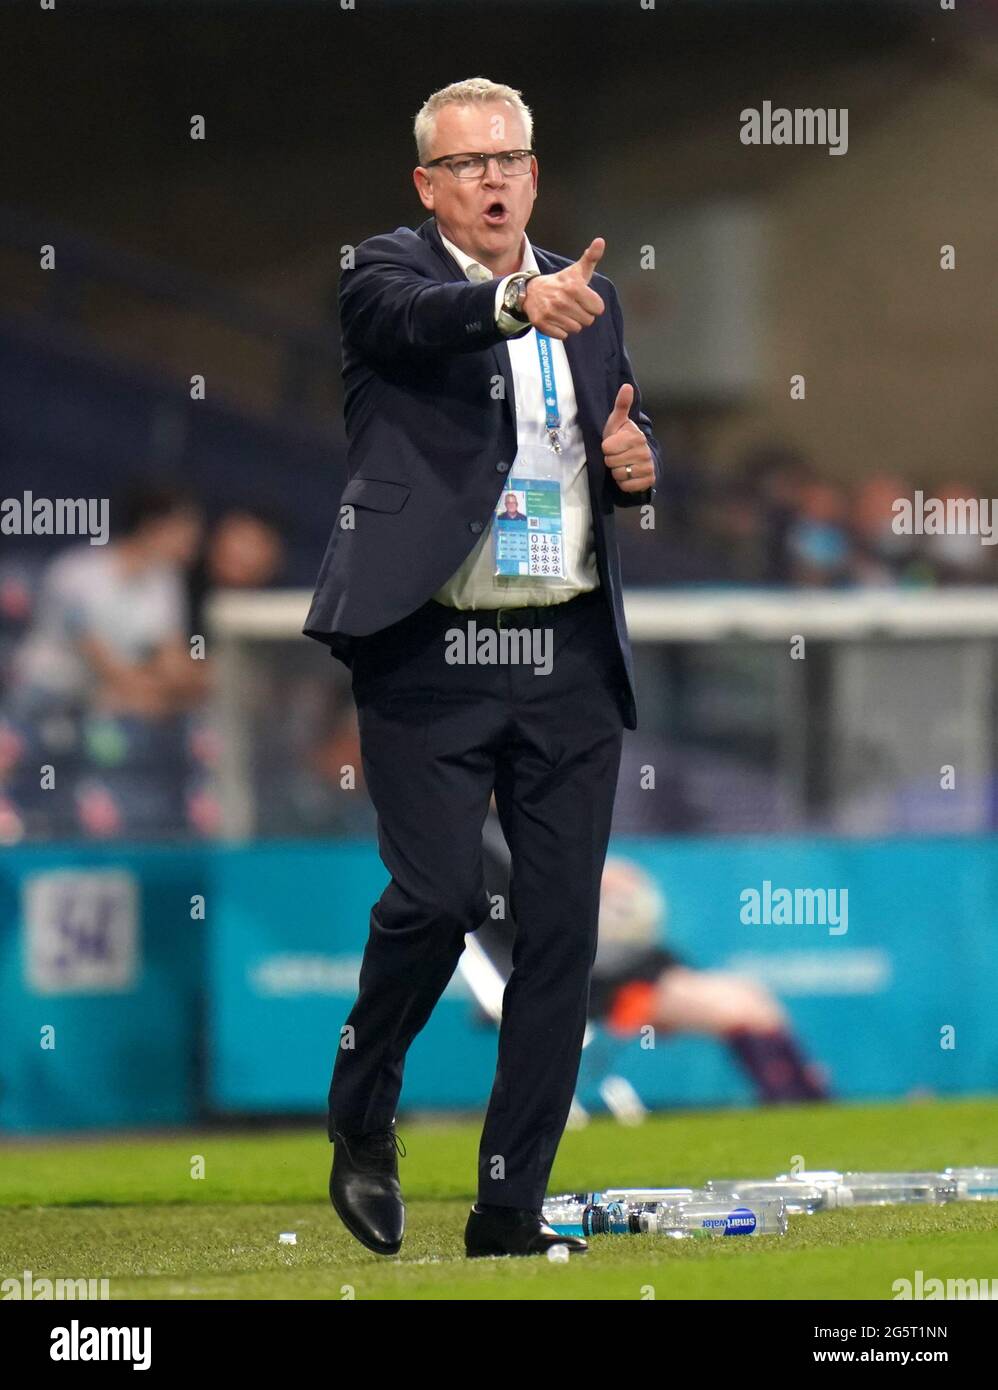 Sweden manager Janne Andersson during the UEFA Euro 2020 round of 16 match at Hampden Park, Glasgow. Picture date: Tuesday June 29, 2021. Stock Photo